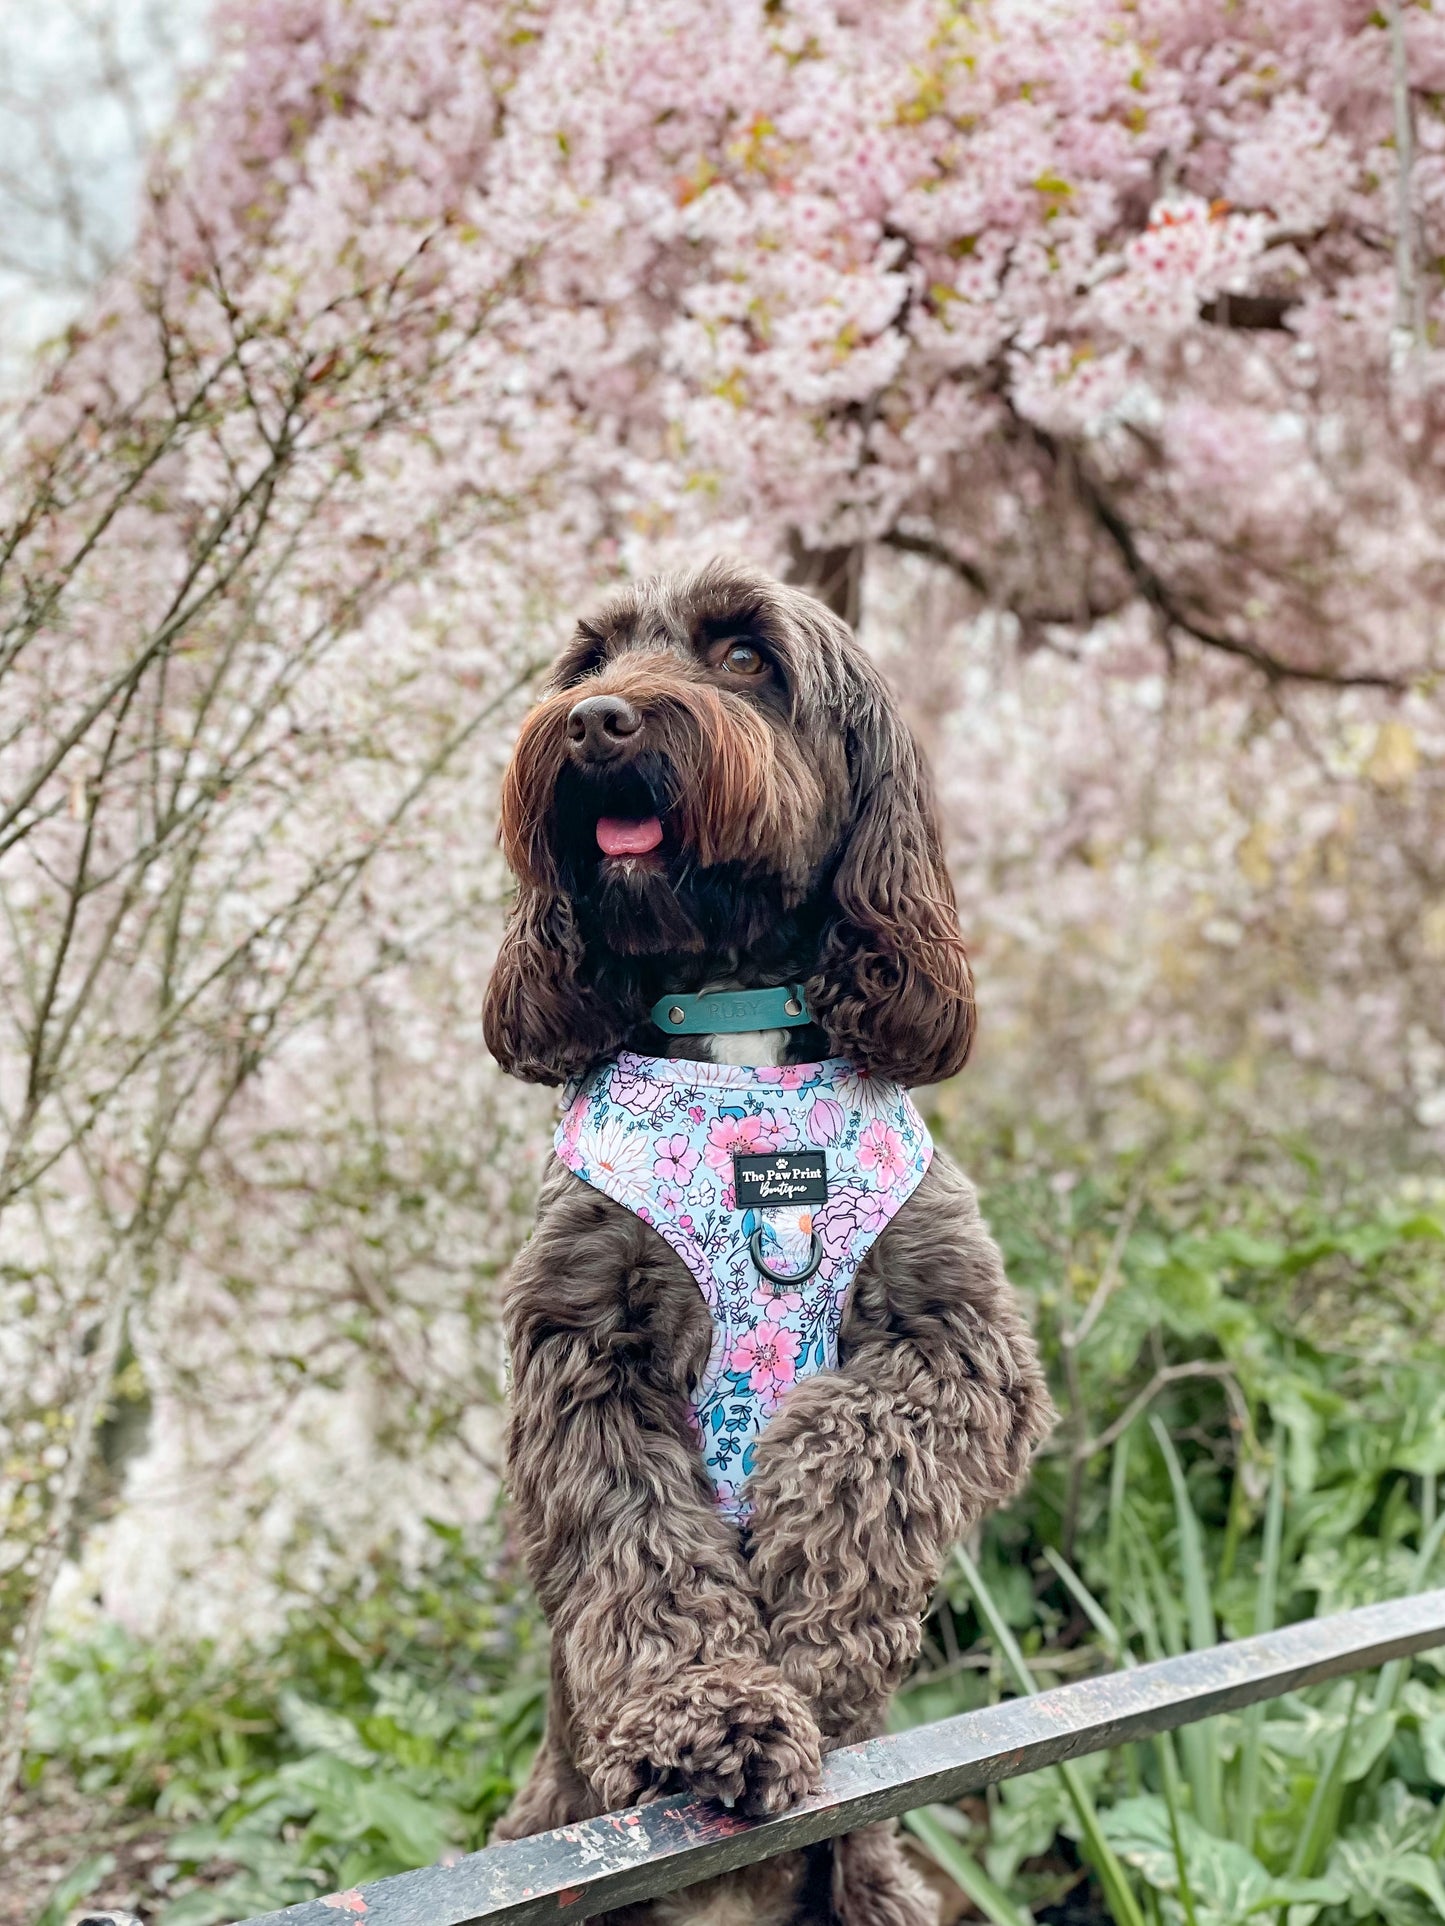 The Fabulous in Floral Harness